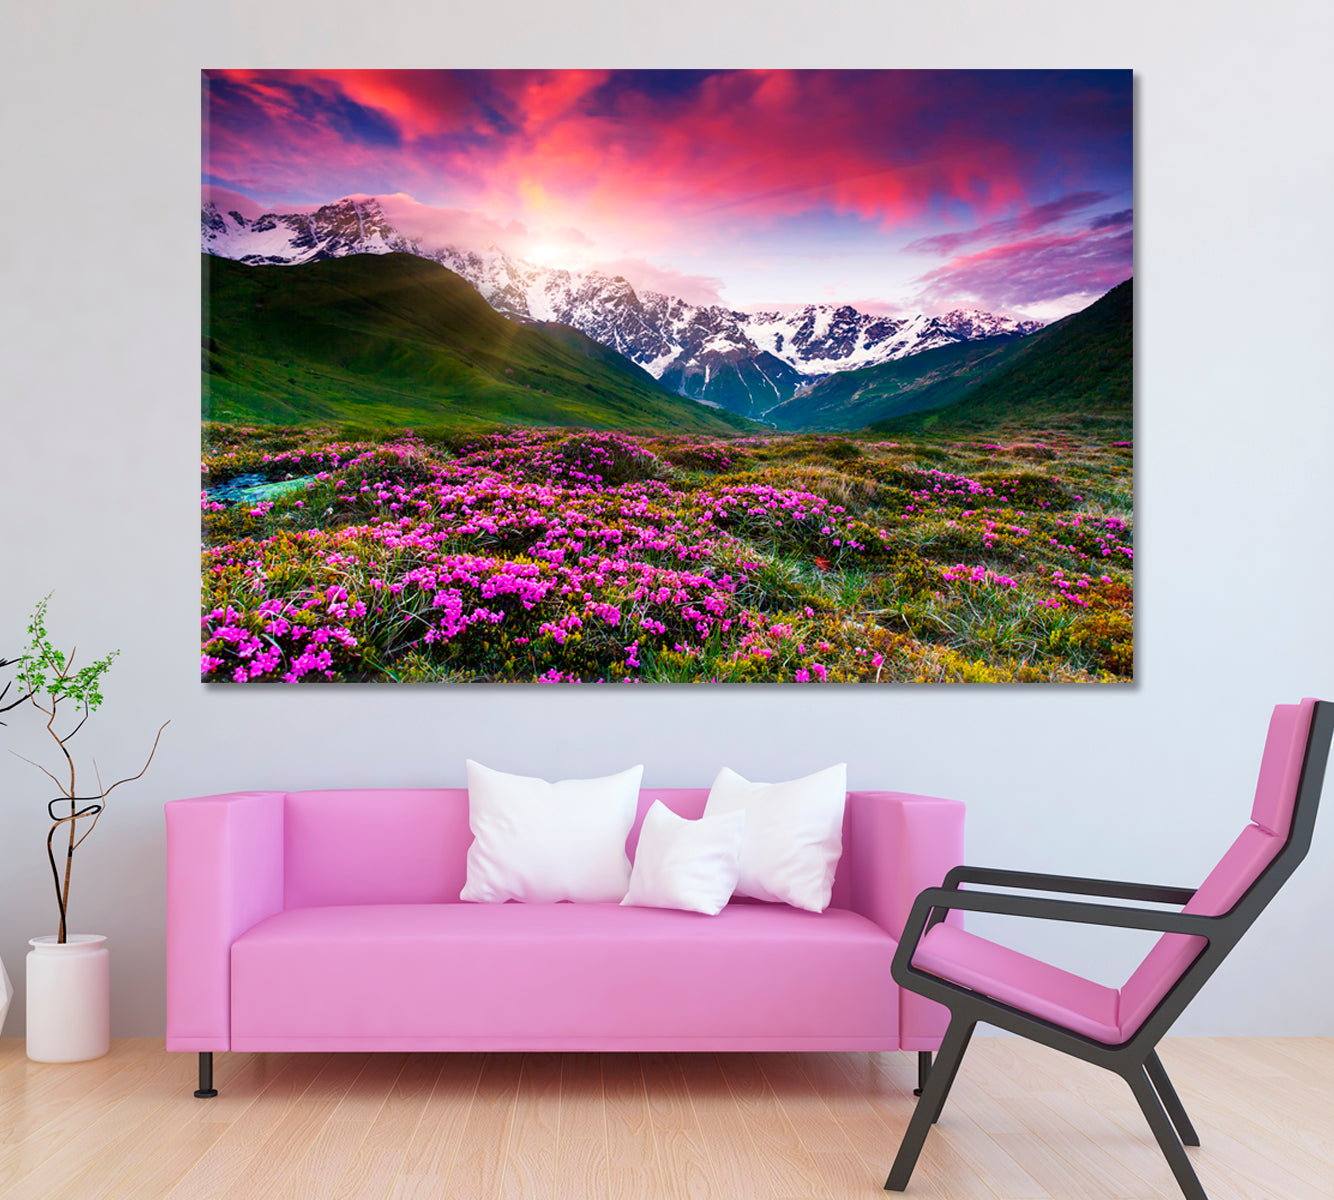 Colorful Sunset Over Georgia Mountains Canvas Print ArtLexy 1 Panel 24"x16" inches 